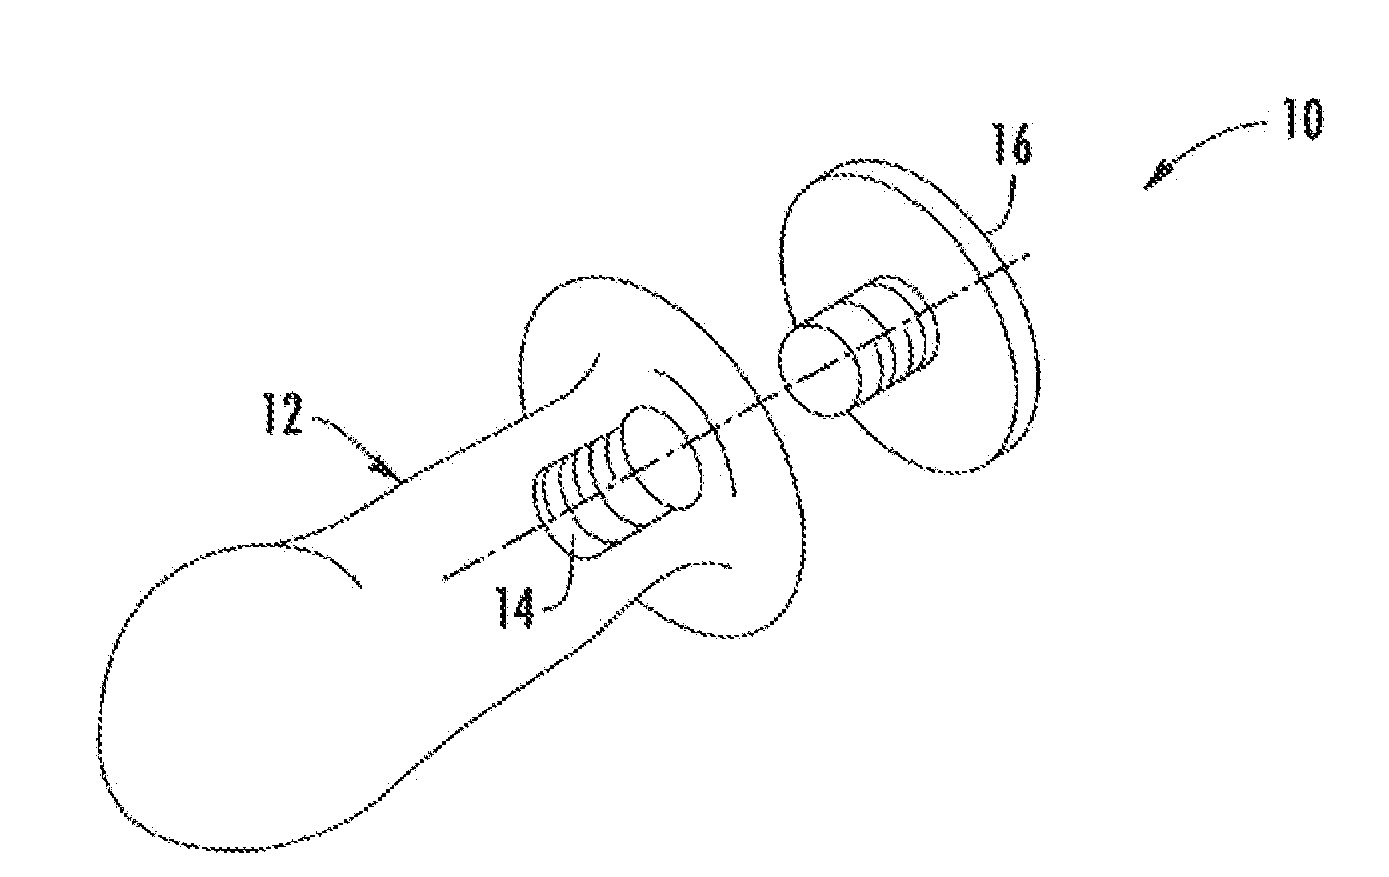 Phallus device and system with screw attachment